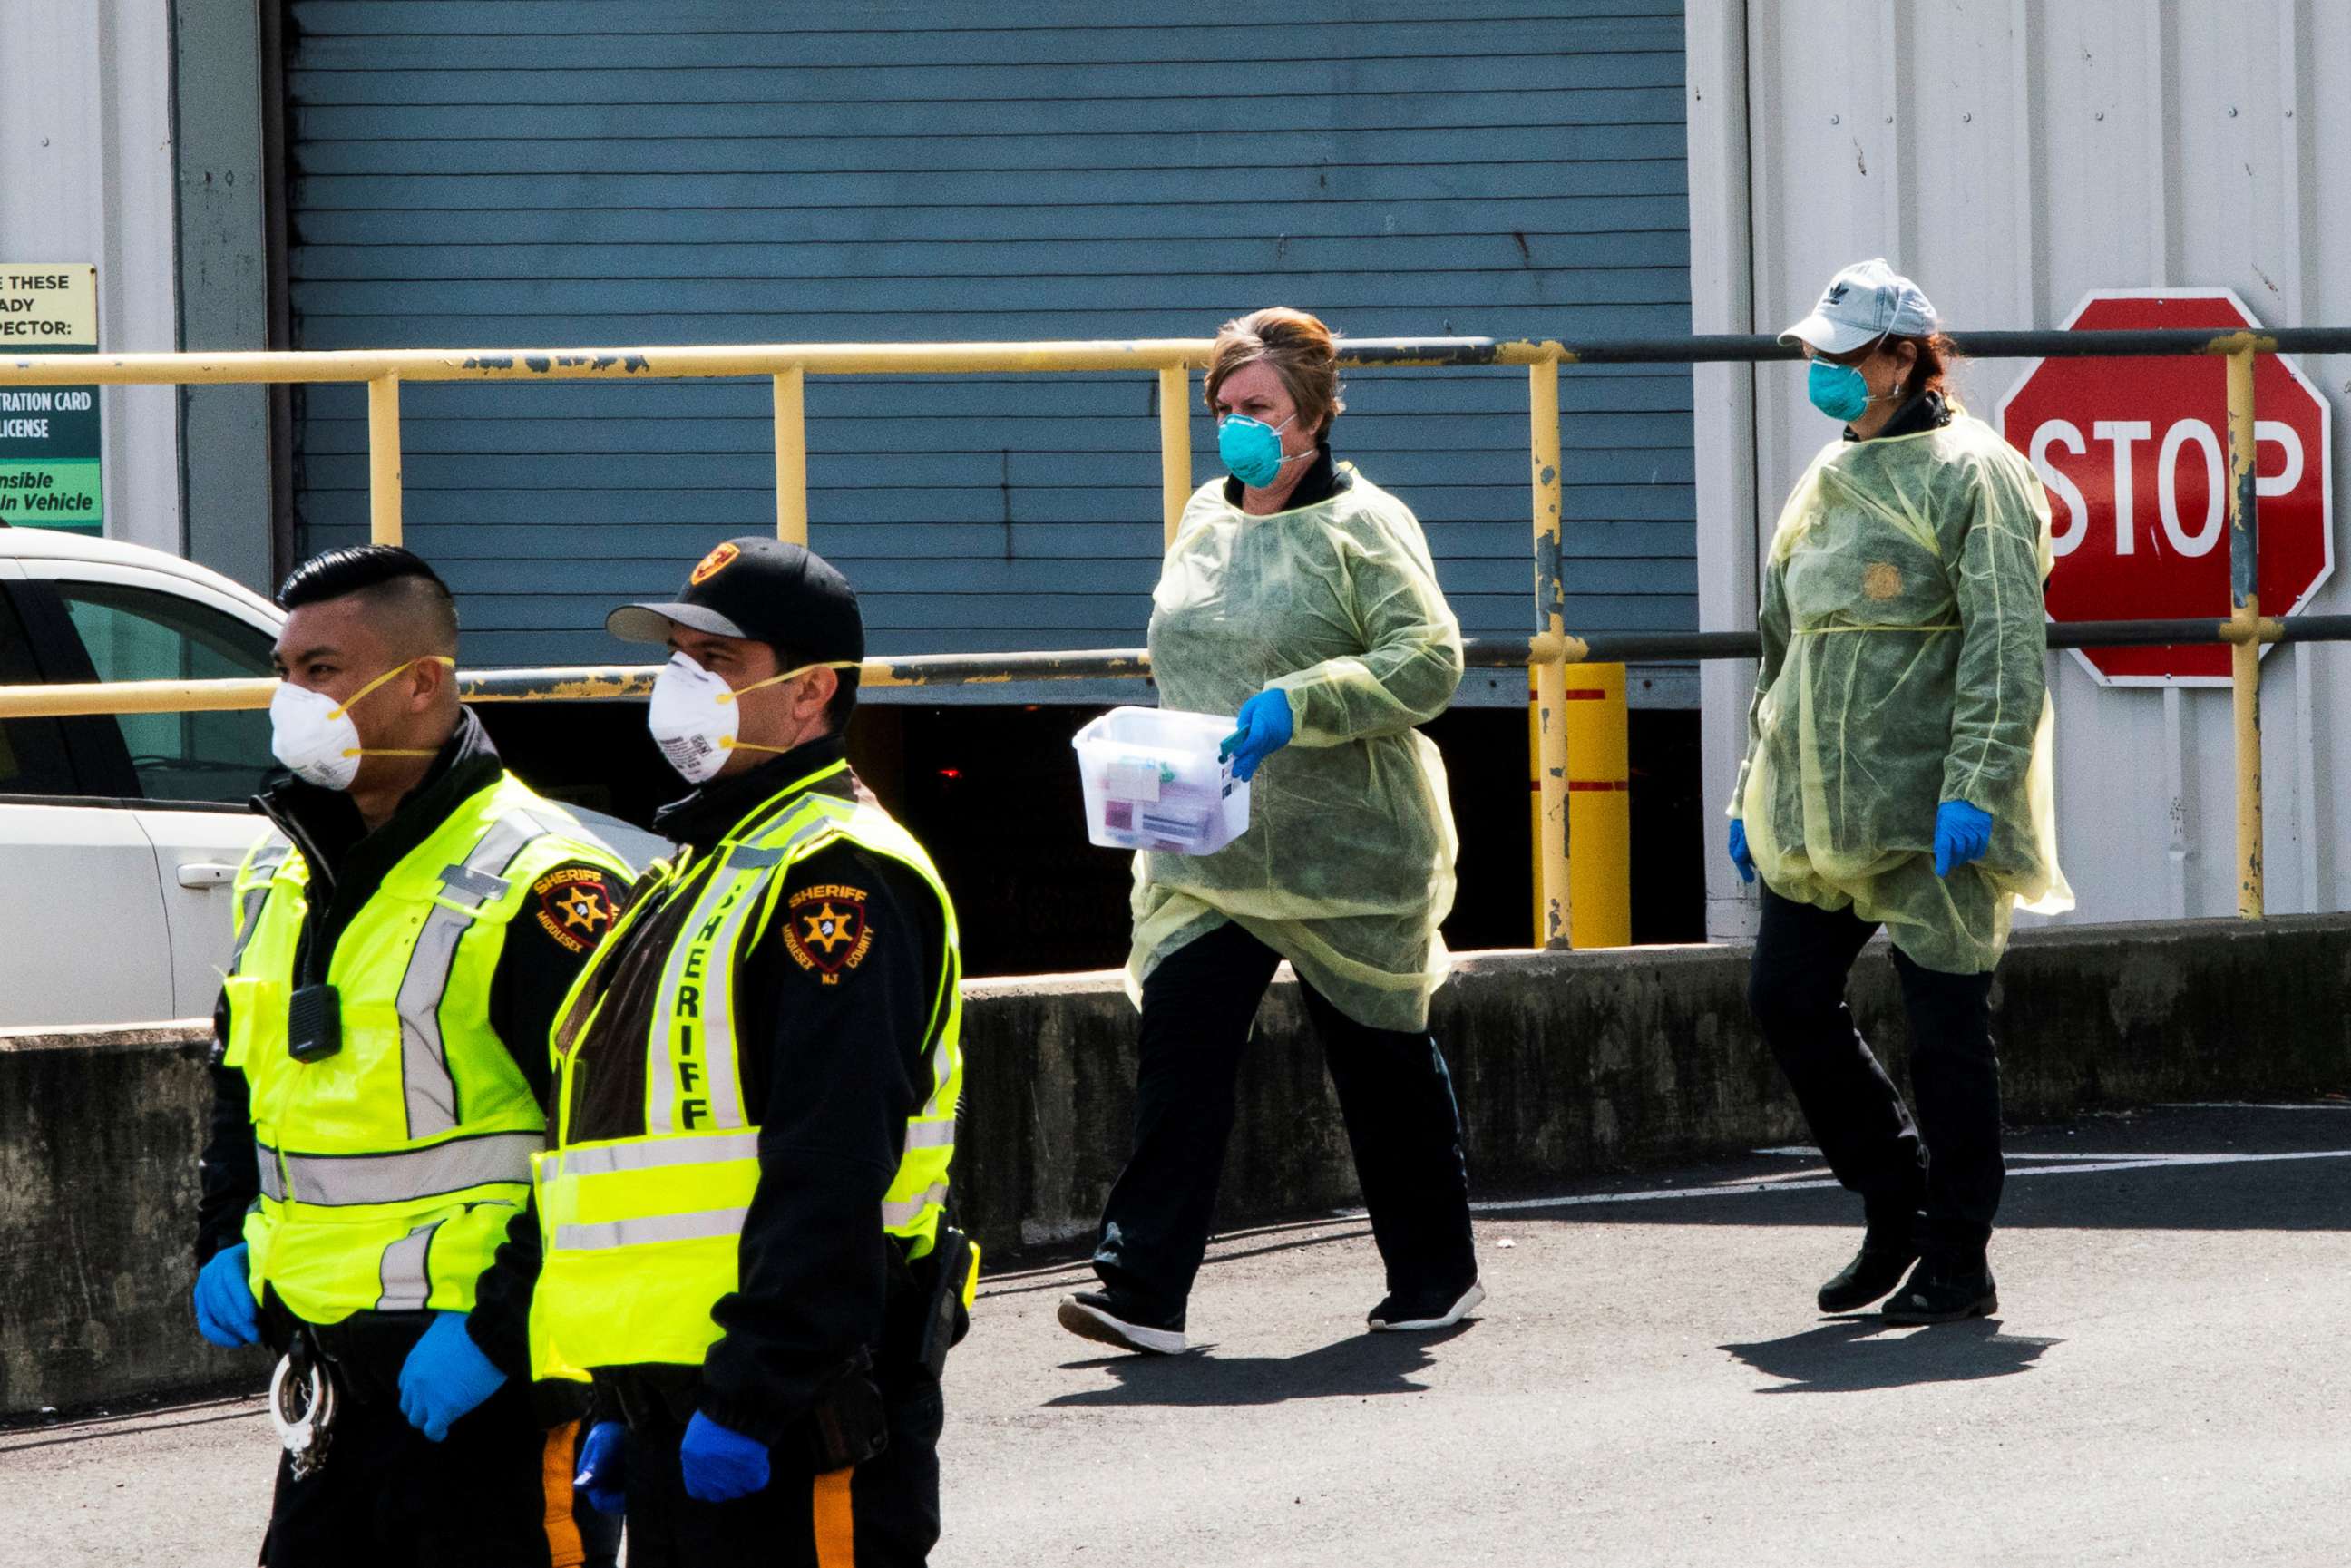 PHOTO: New Jersey police officers and health workers are seen in a newly approved saliva-based COVID-19 testing site during the coronavirus pandemic, in Edison, New Jersey, April 15, 2020.